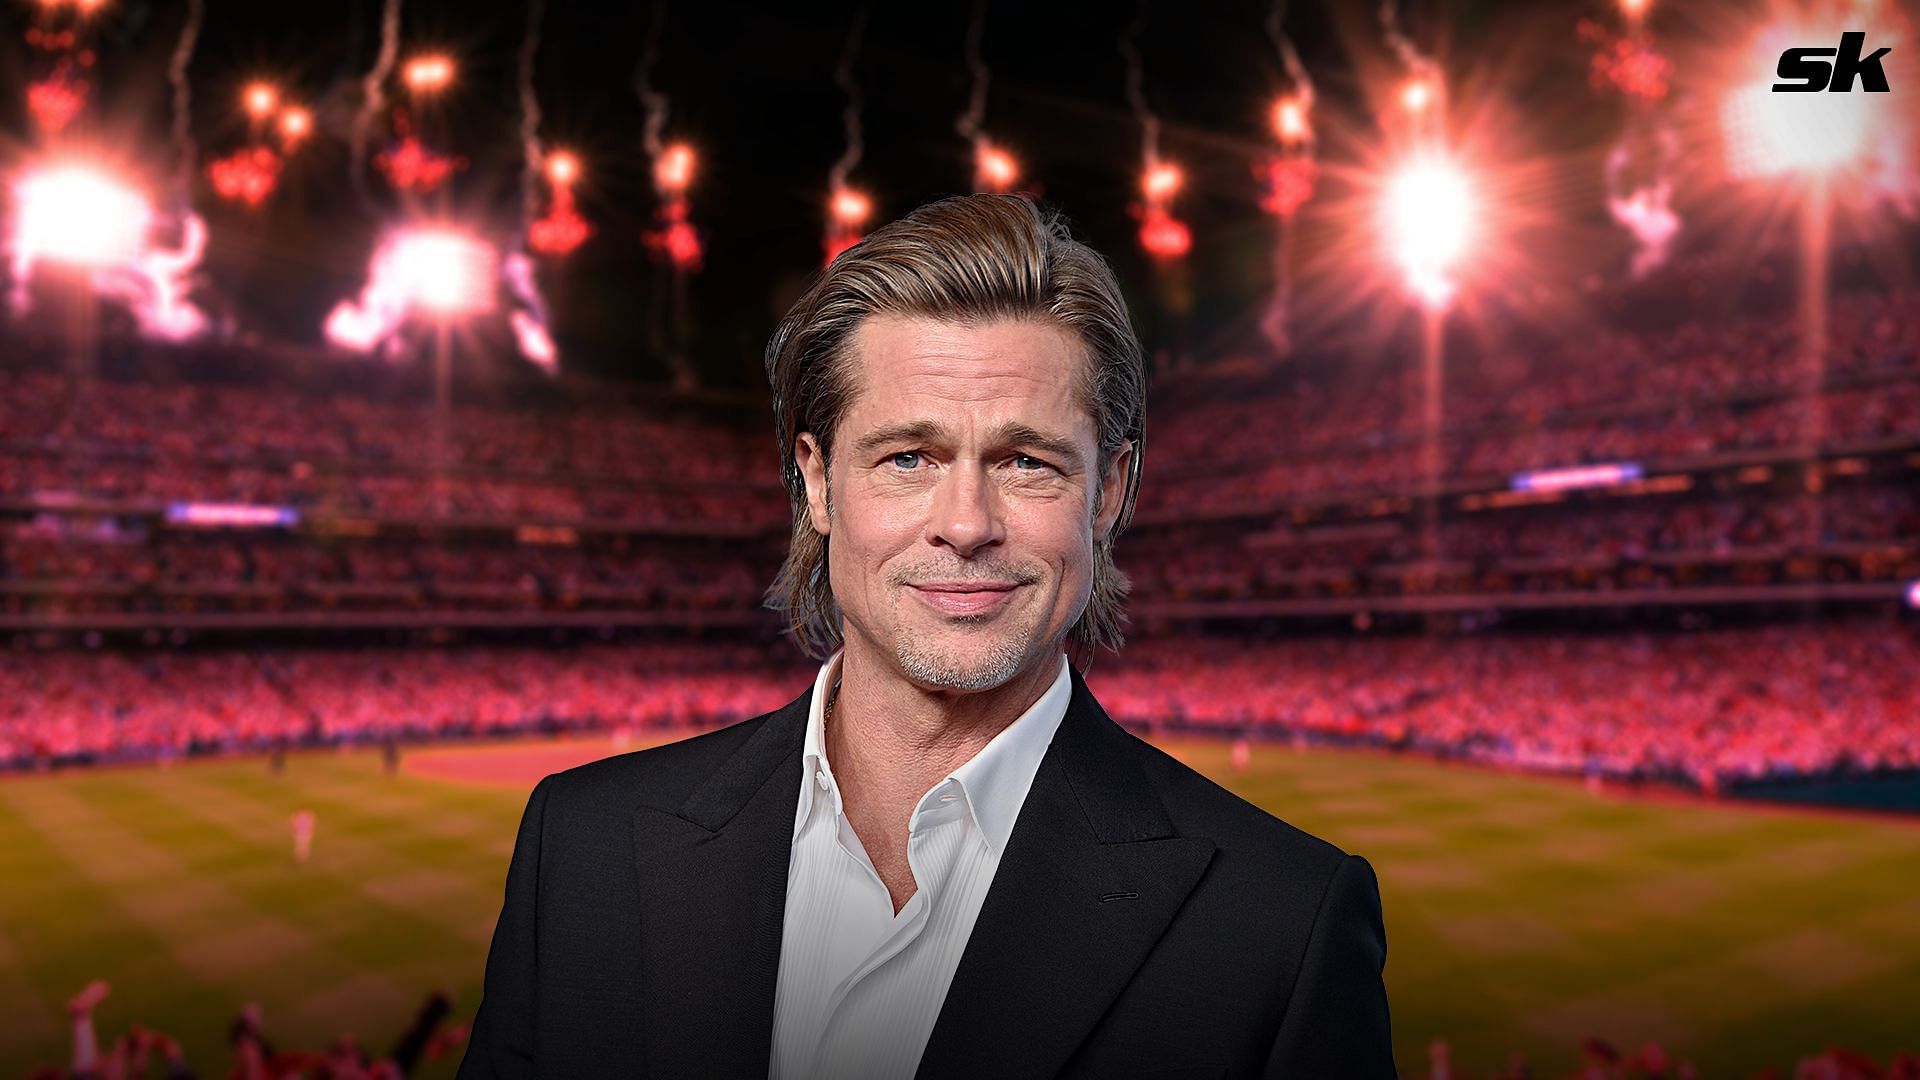 Brad Pitt admitted that he needed to brush up on his baseball knowledge before Moneyball role